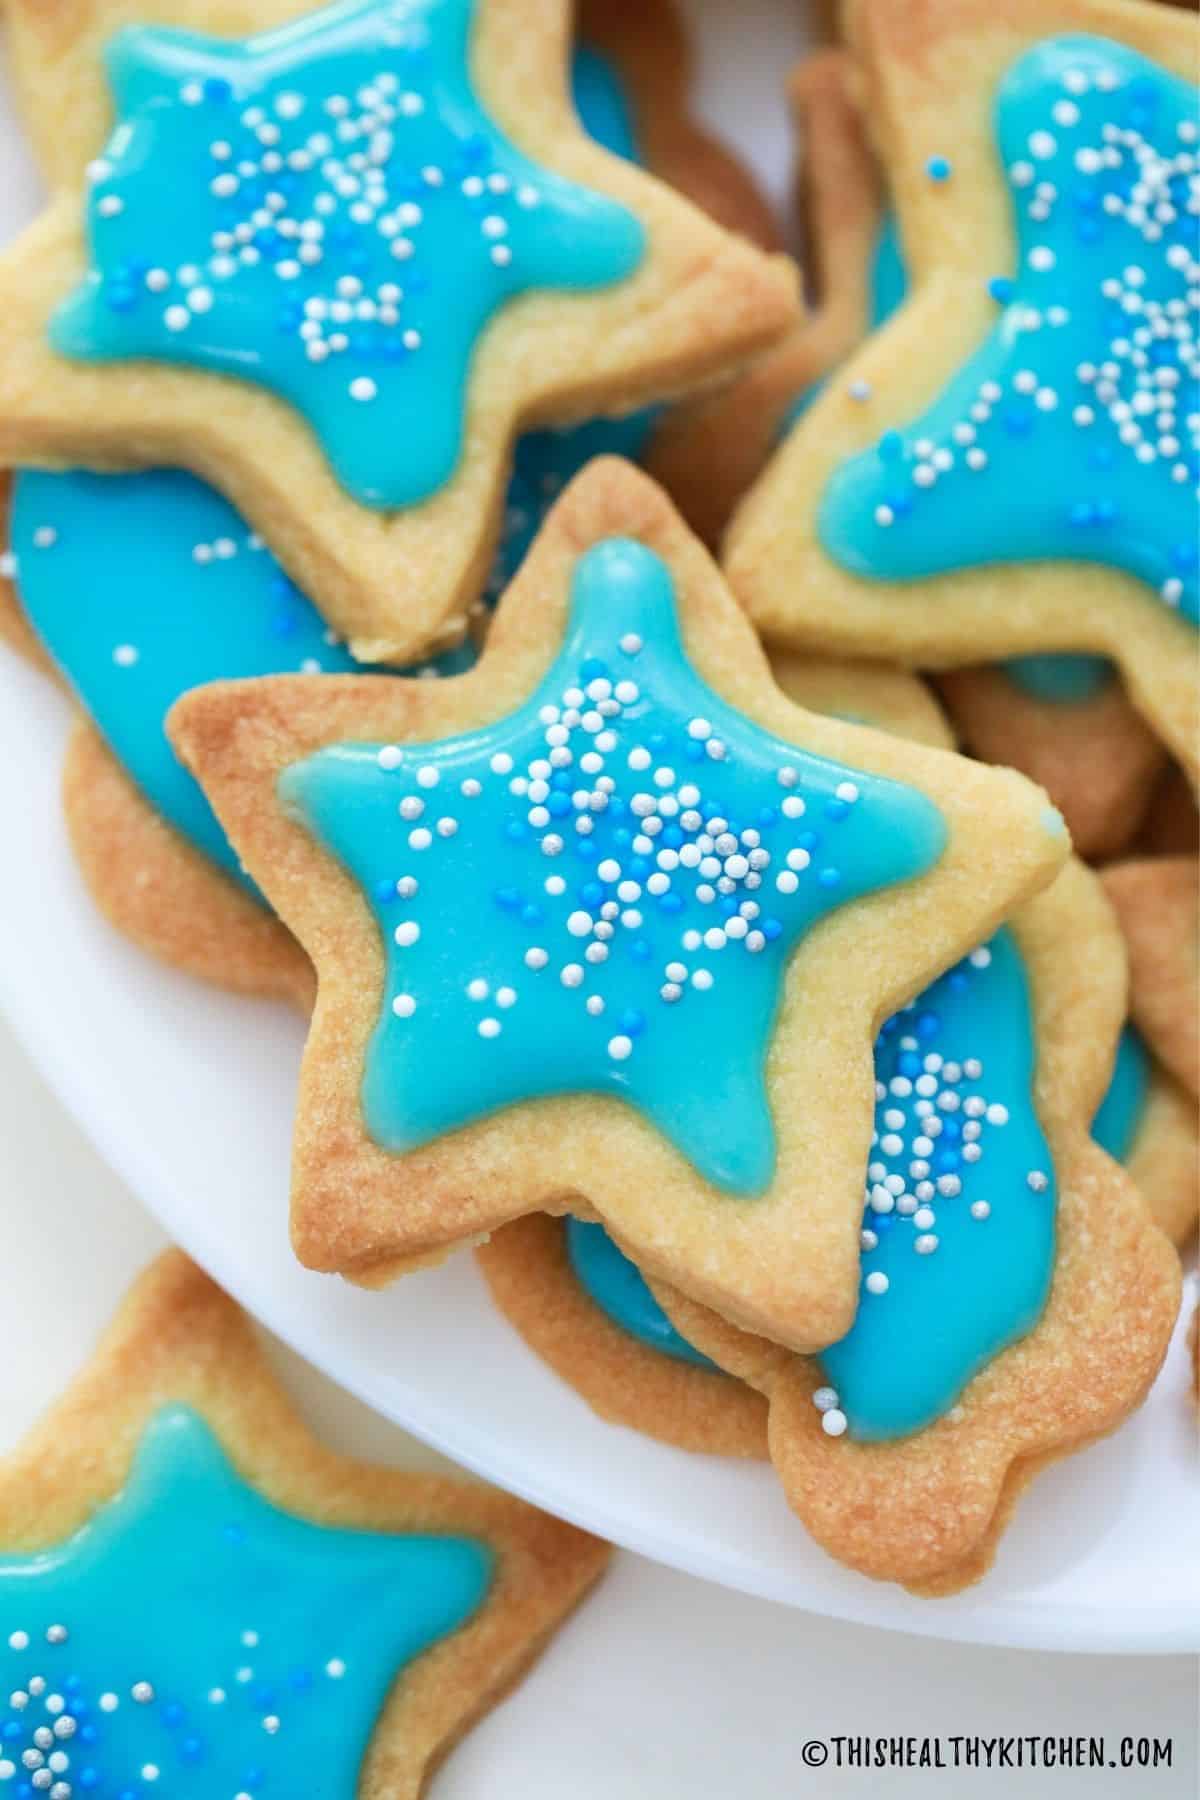 Close up of star shaped cookie with blue icing and sprinkles on top.